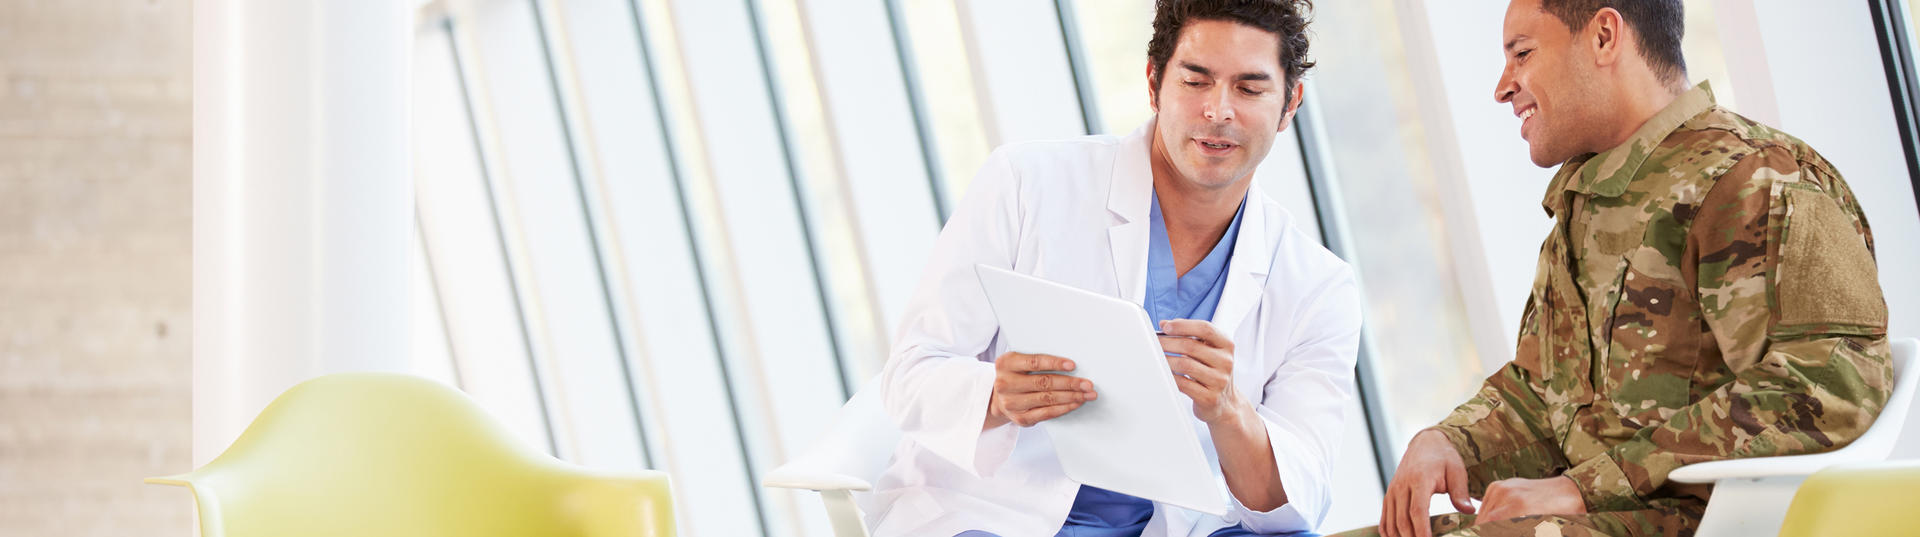 doctor speaking with service member while looking at document